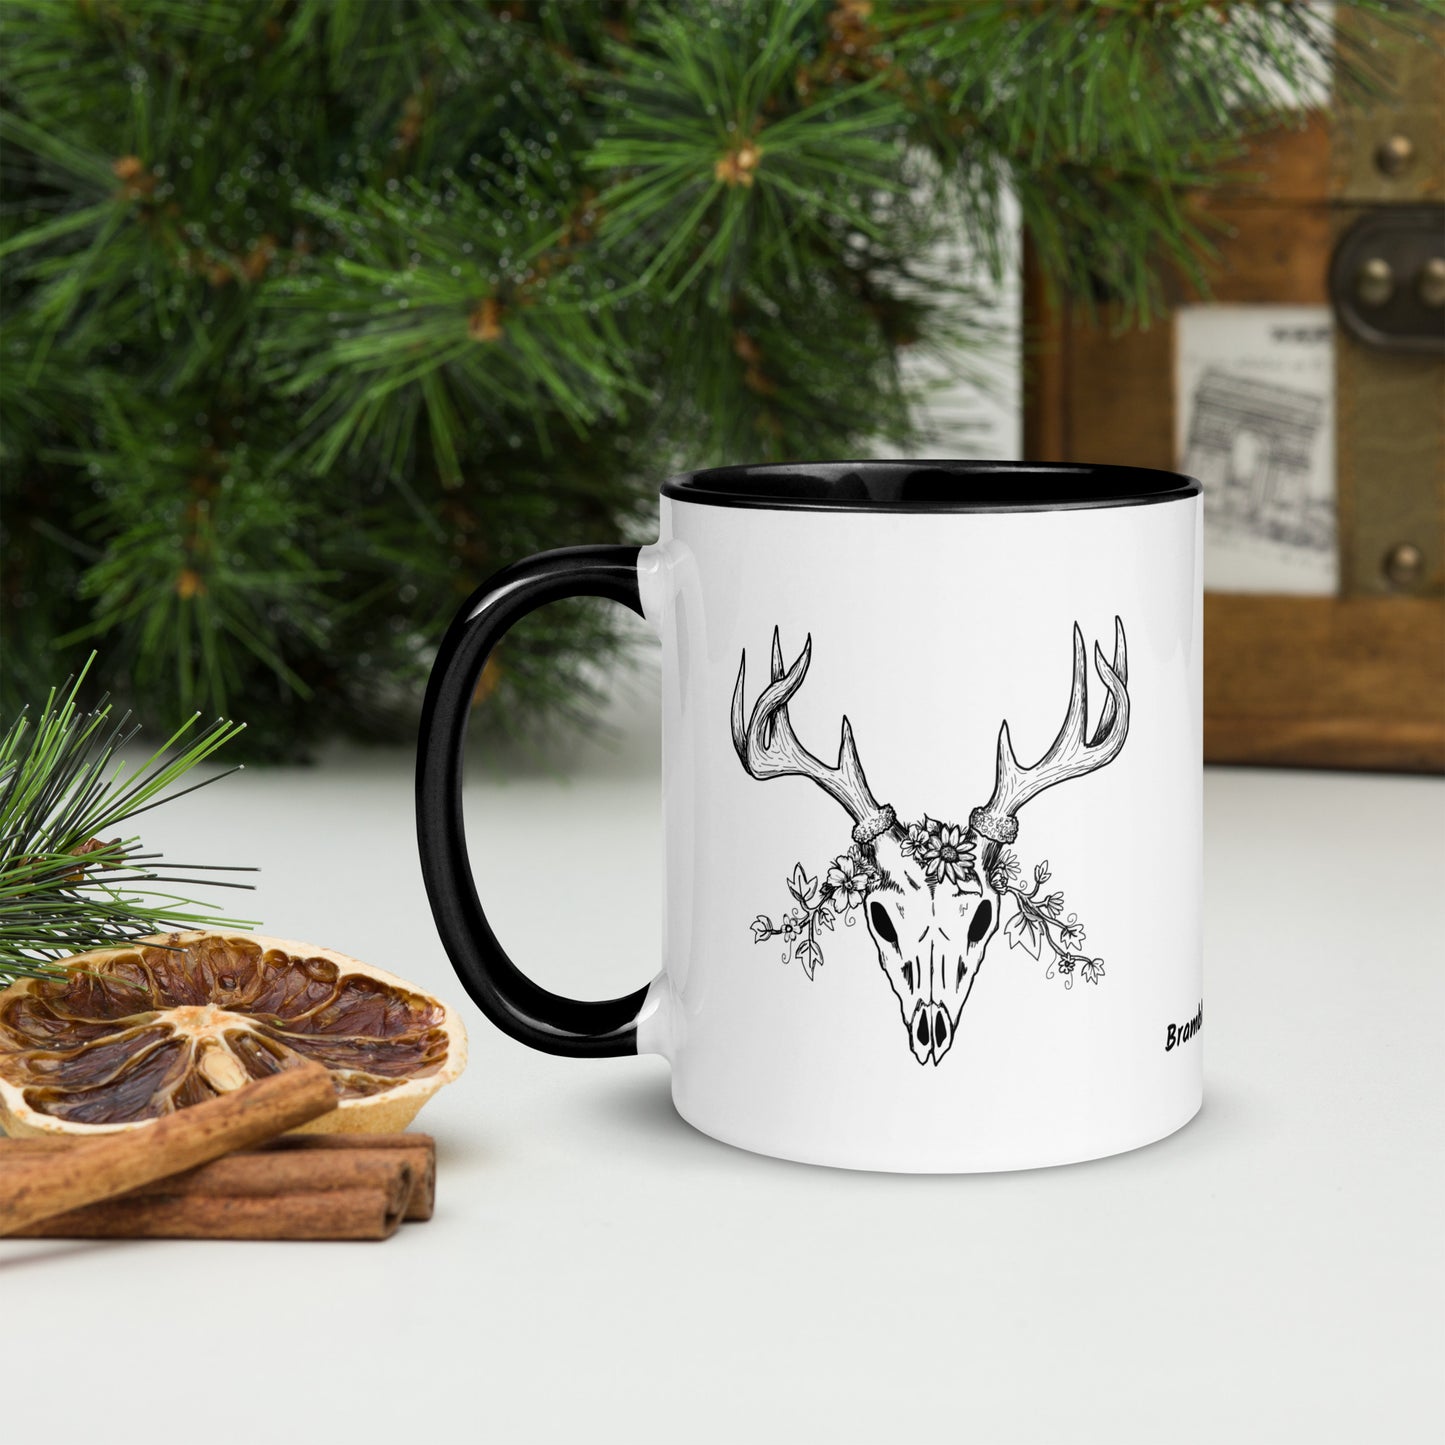 11 ounce ceramic mug with hand illustrated deer skull wreathed in flowers. Double-sided design. Mug has black rim, handle, and inside. Shown sitting on a tabletop by pine branches, cinnamon sticks, and dried orange slice.